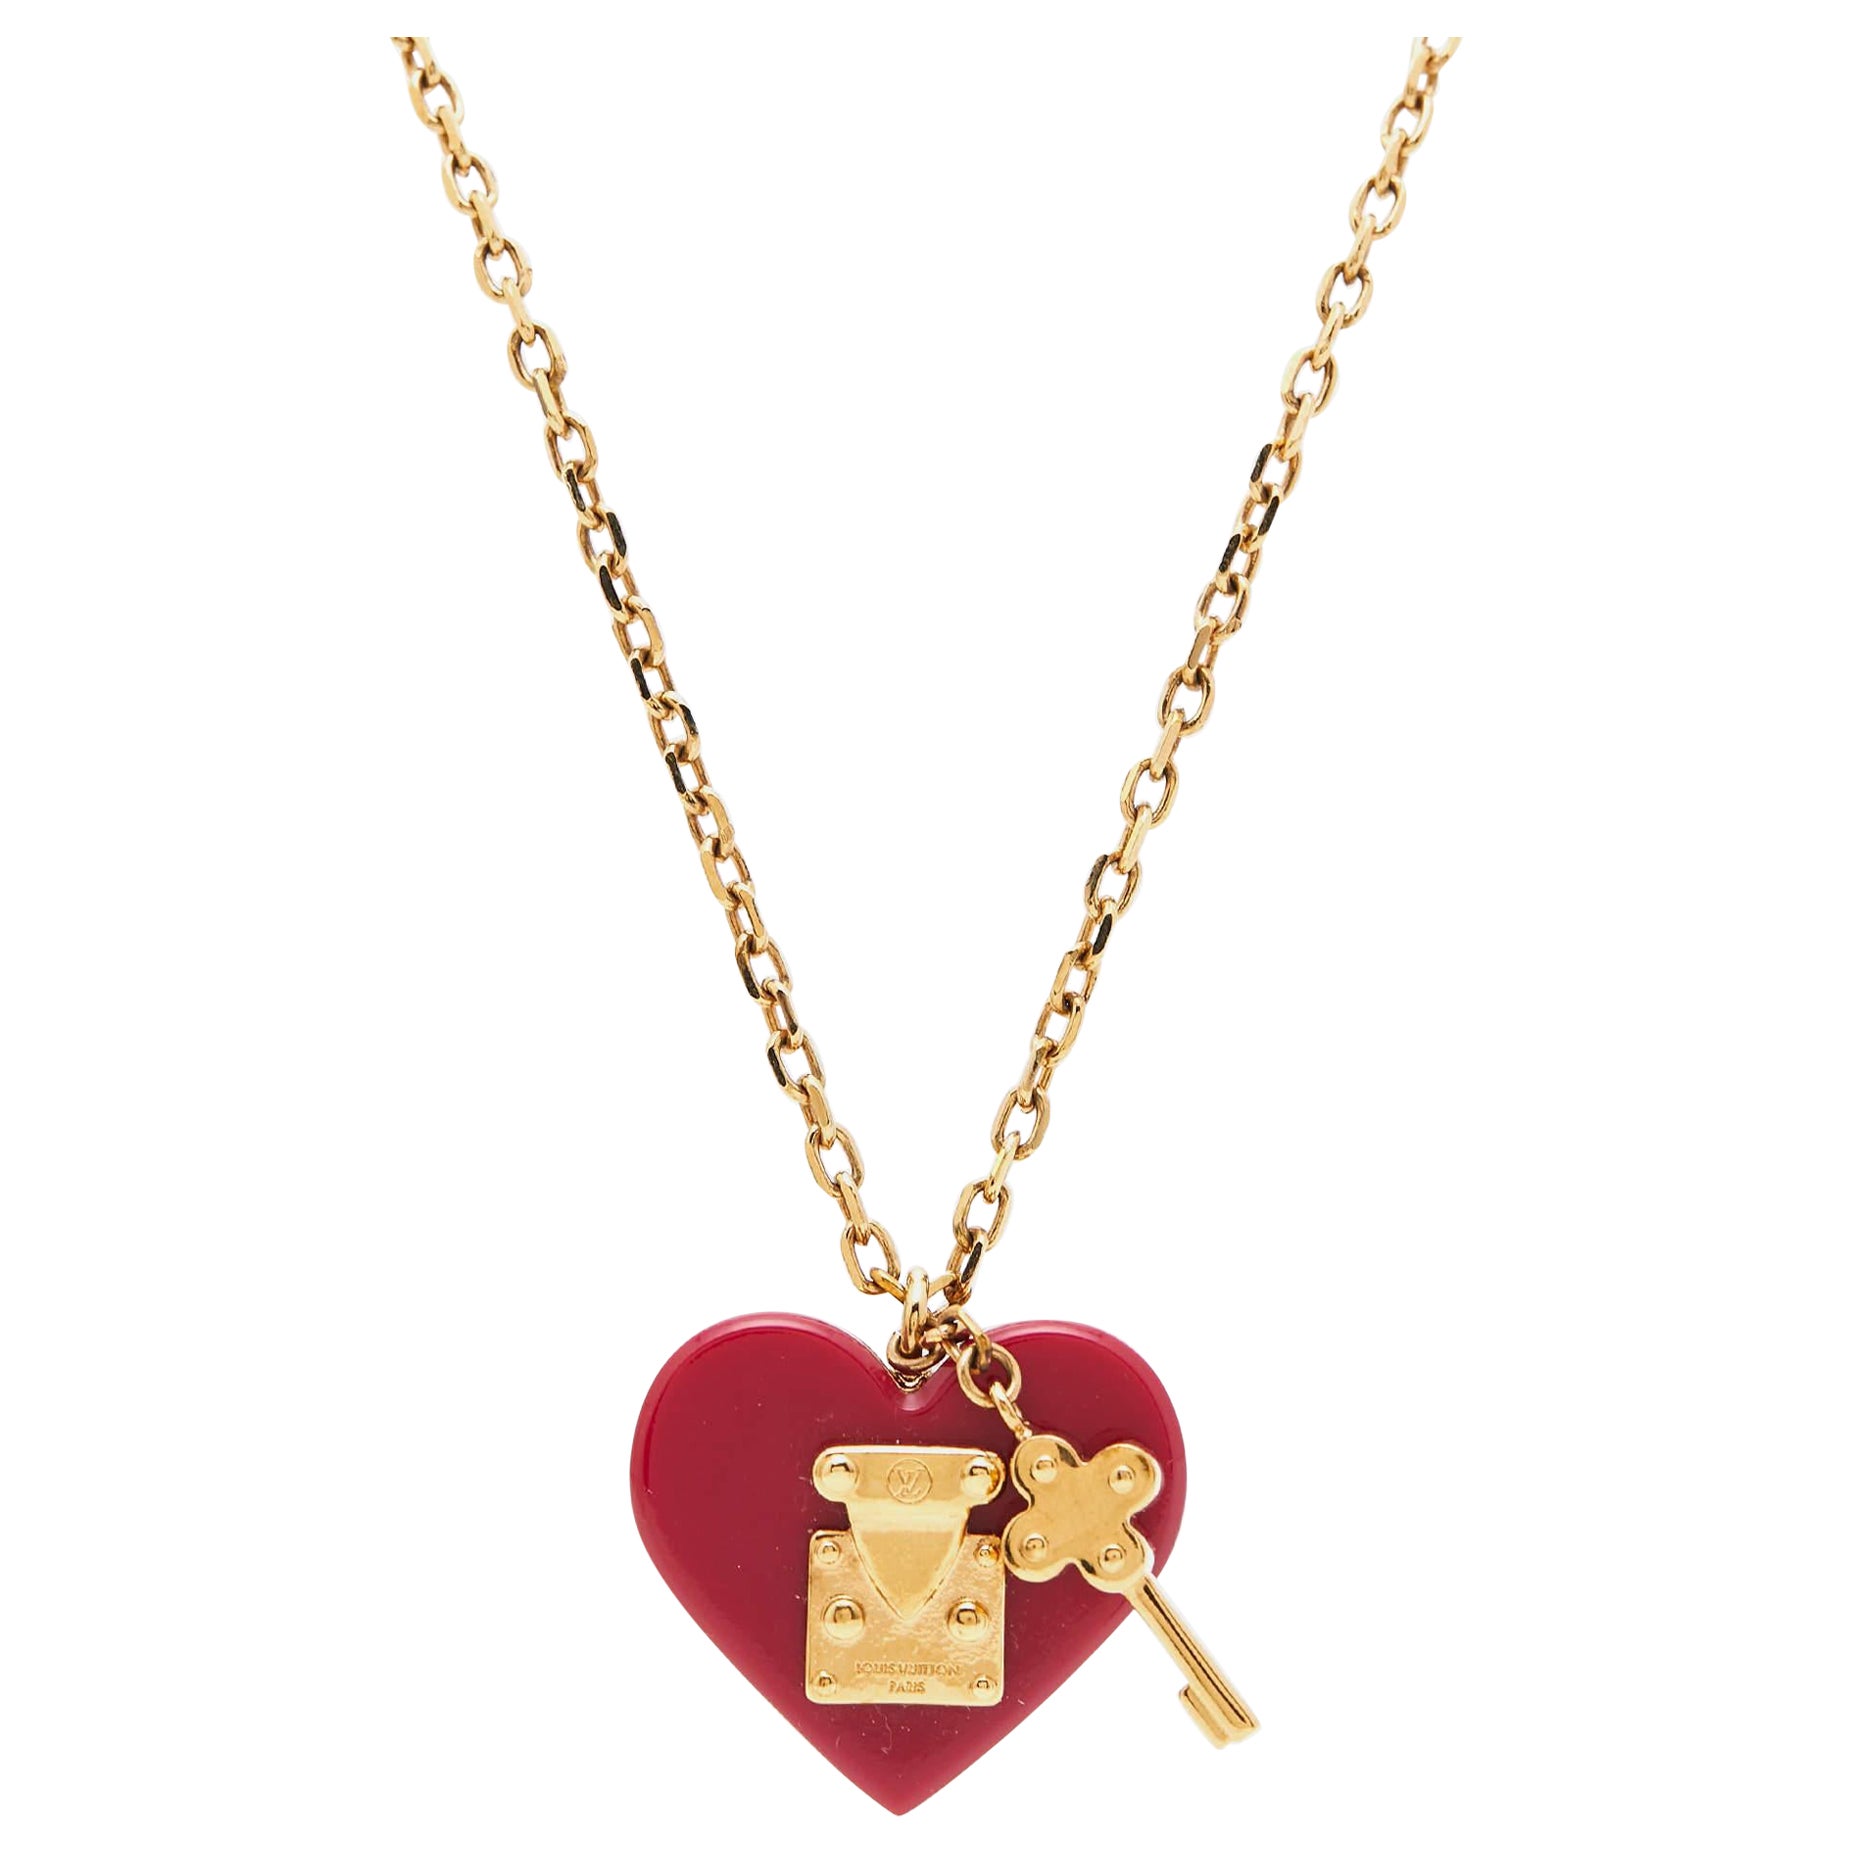 Are Louis Vuitton necklaces real gold?